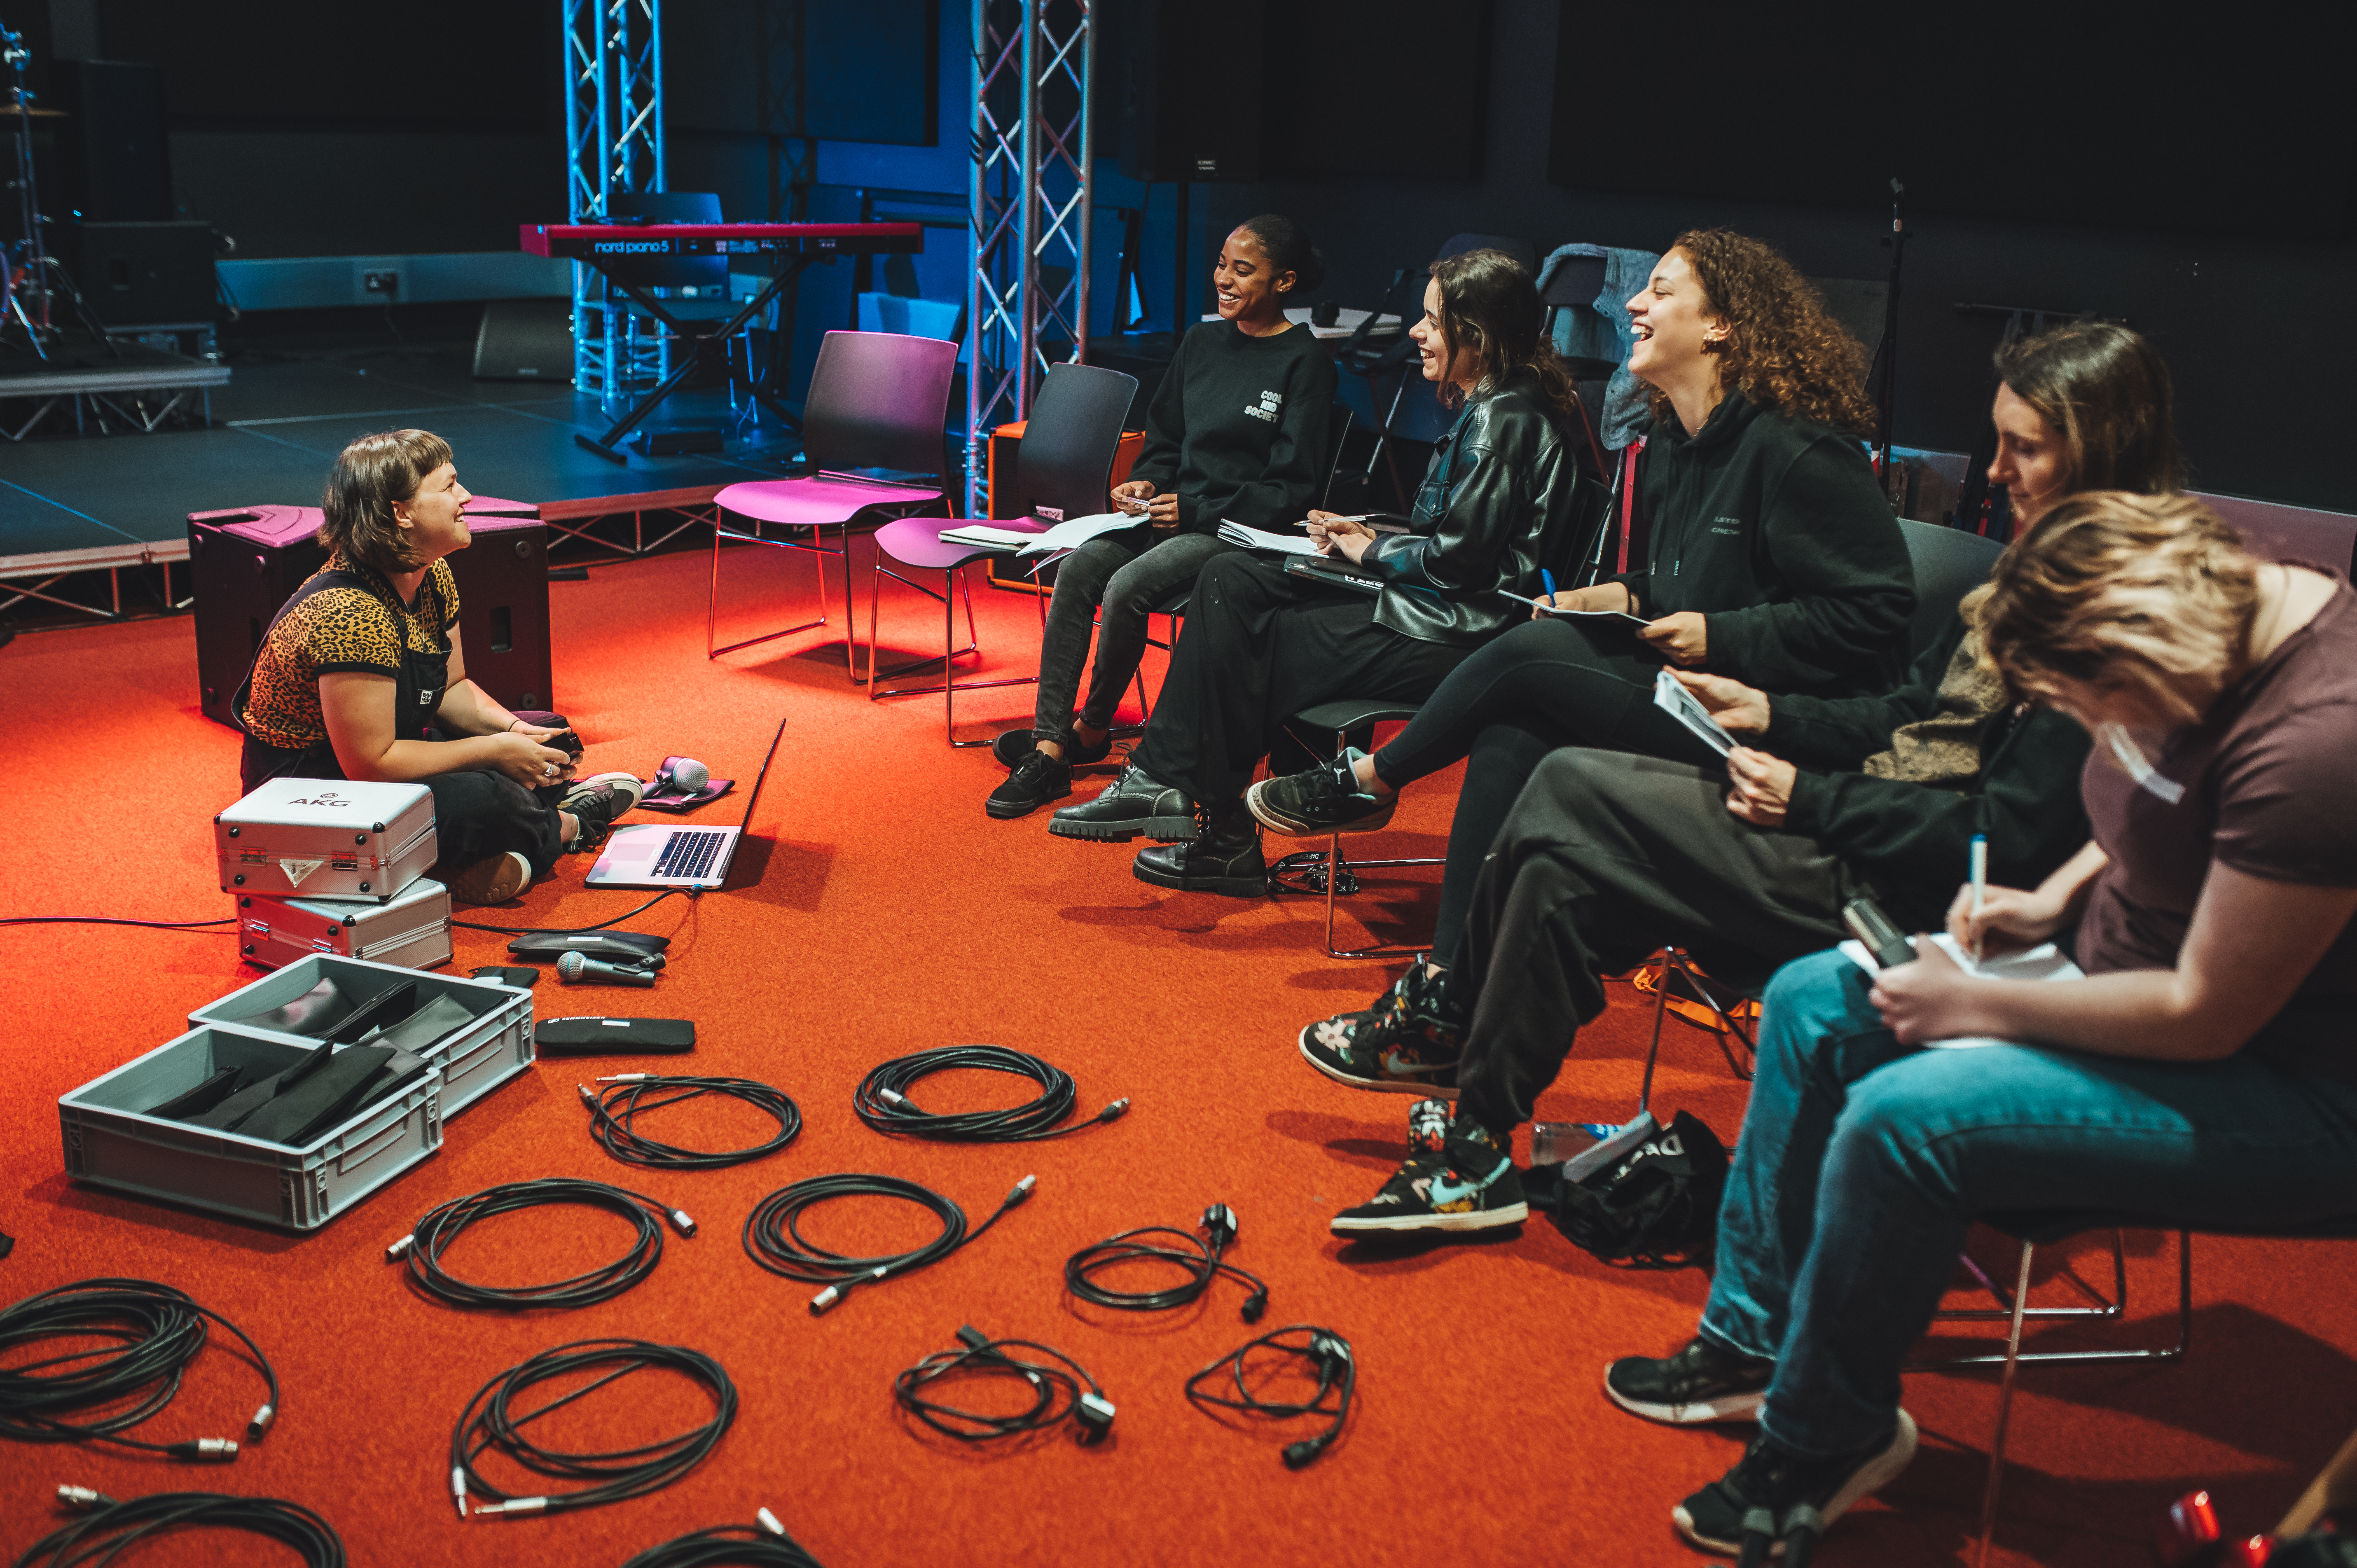 a group of women sit in a semi-circle on chairs, laughing. there are electric cables on the floor as one woman sitting on the floor in front leads the session 